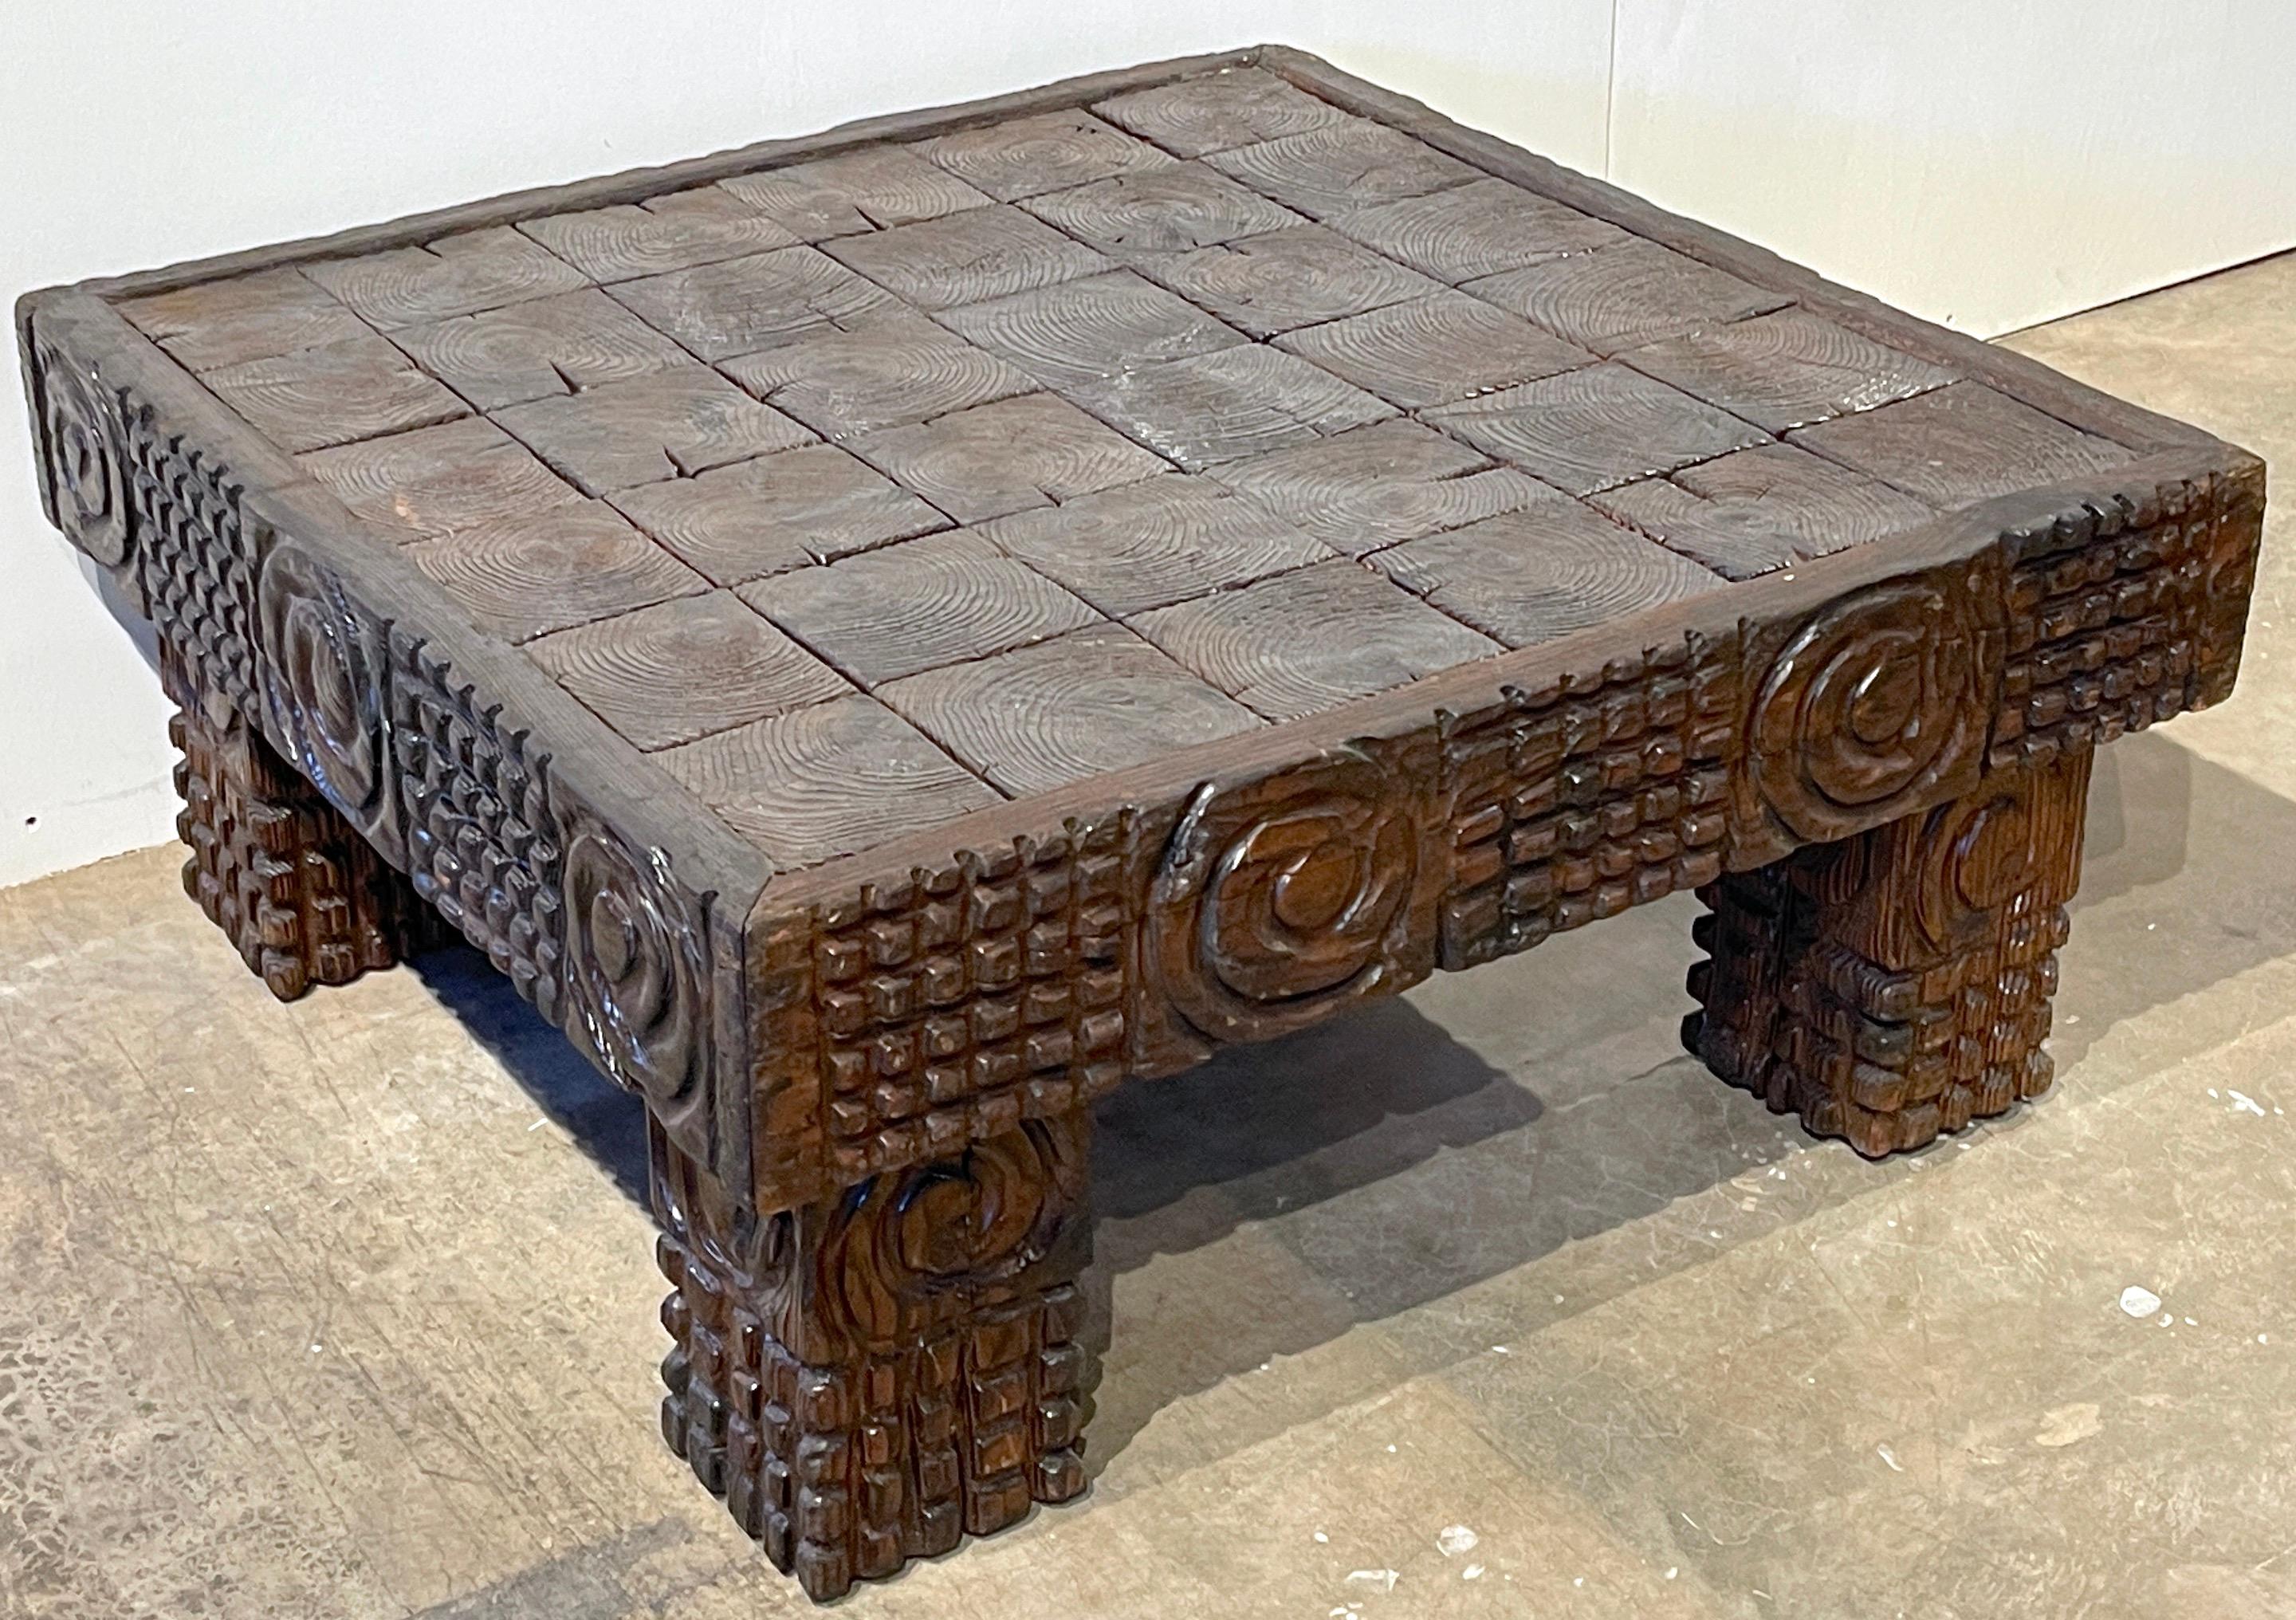 1960s Mod carved square coffee table, Witco Studio-William Westerhaver
USA, C. 1960s
A text book example of 1960s Modern design, of William Westerhaver's Witco Studio work. 
Beautifully constructed, with signature sculptural elements and